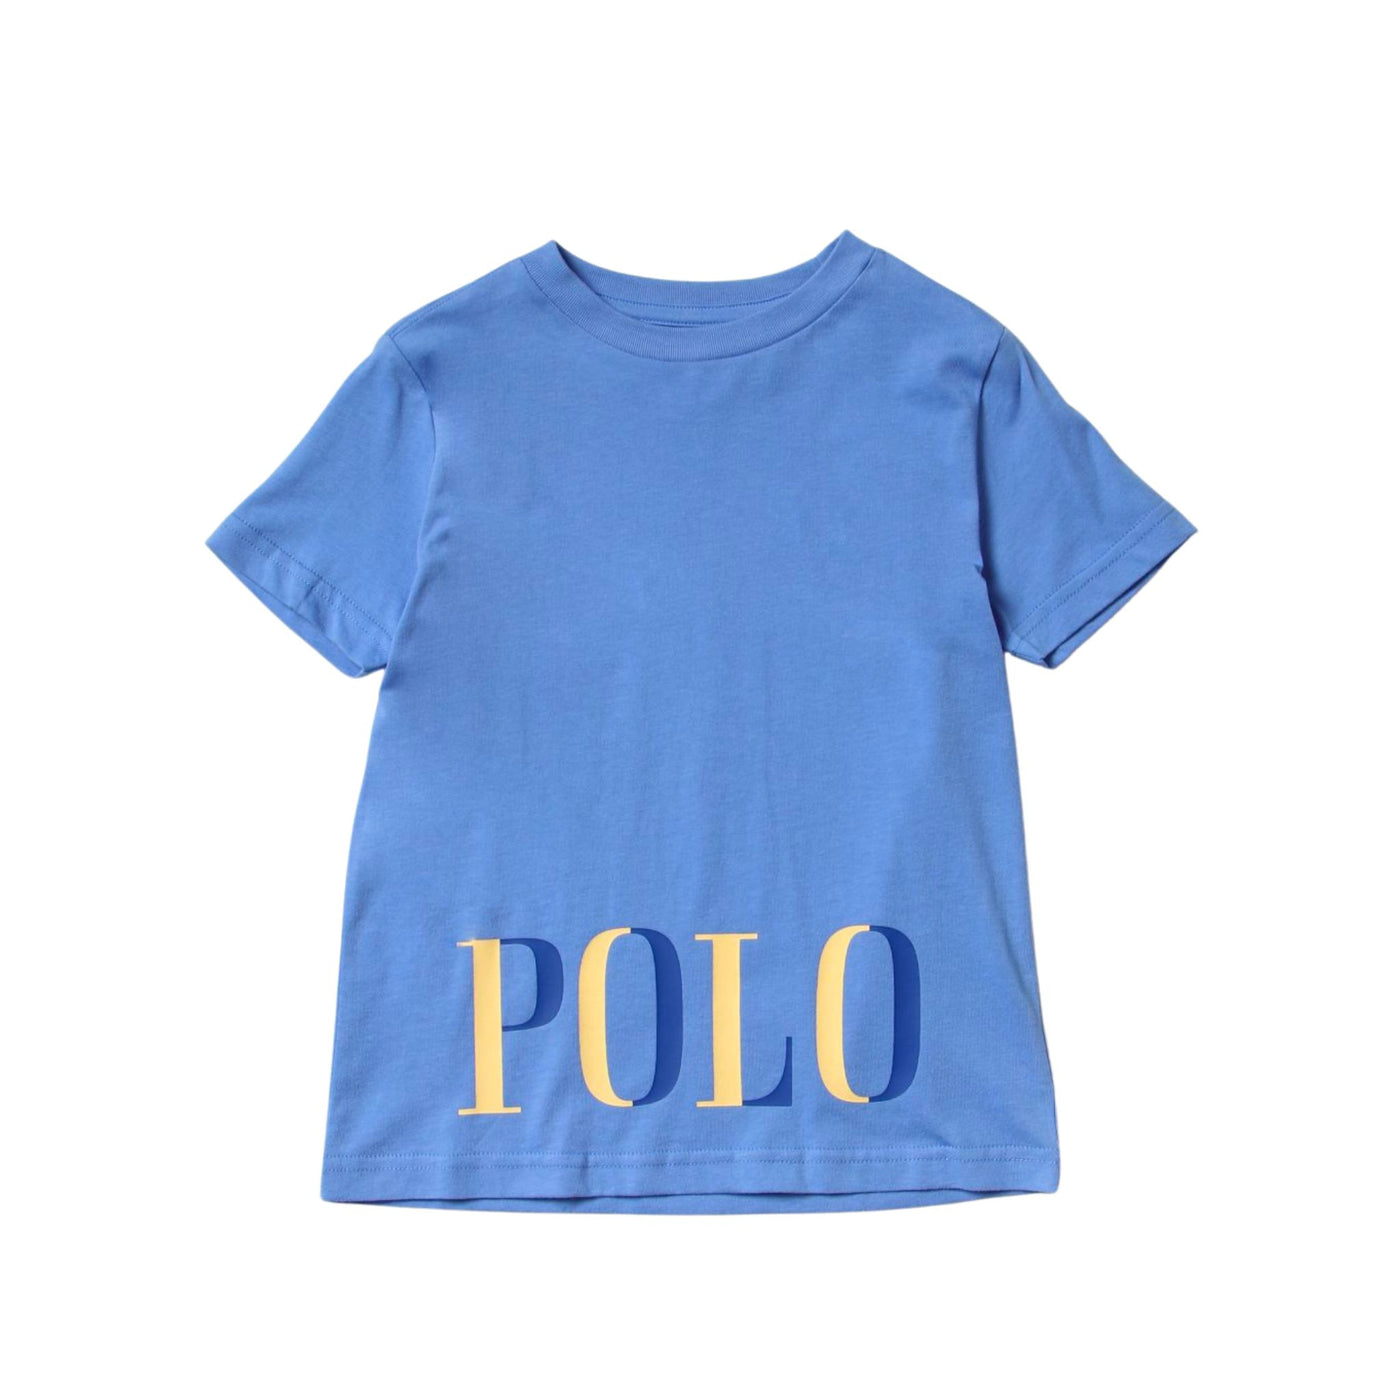 Children's T-shirt with large logo